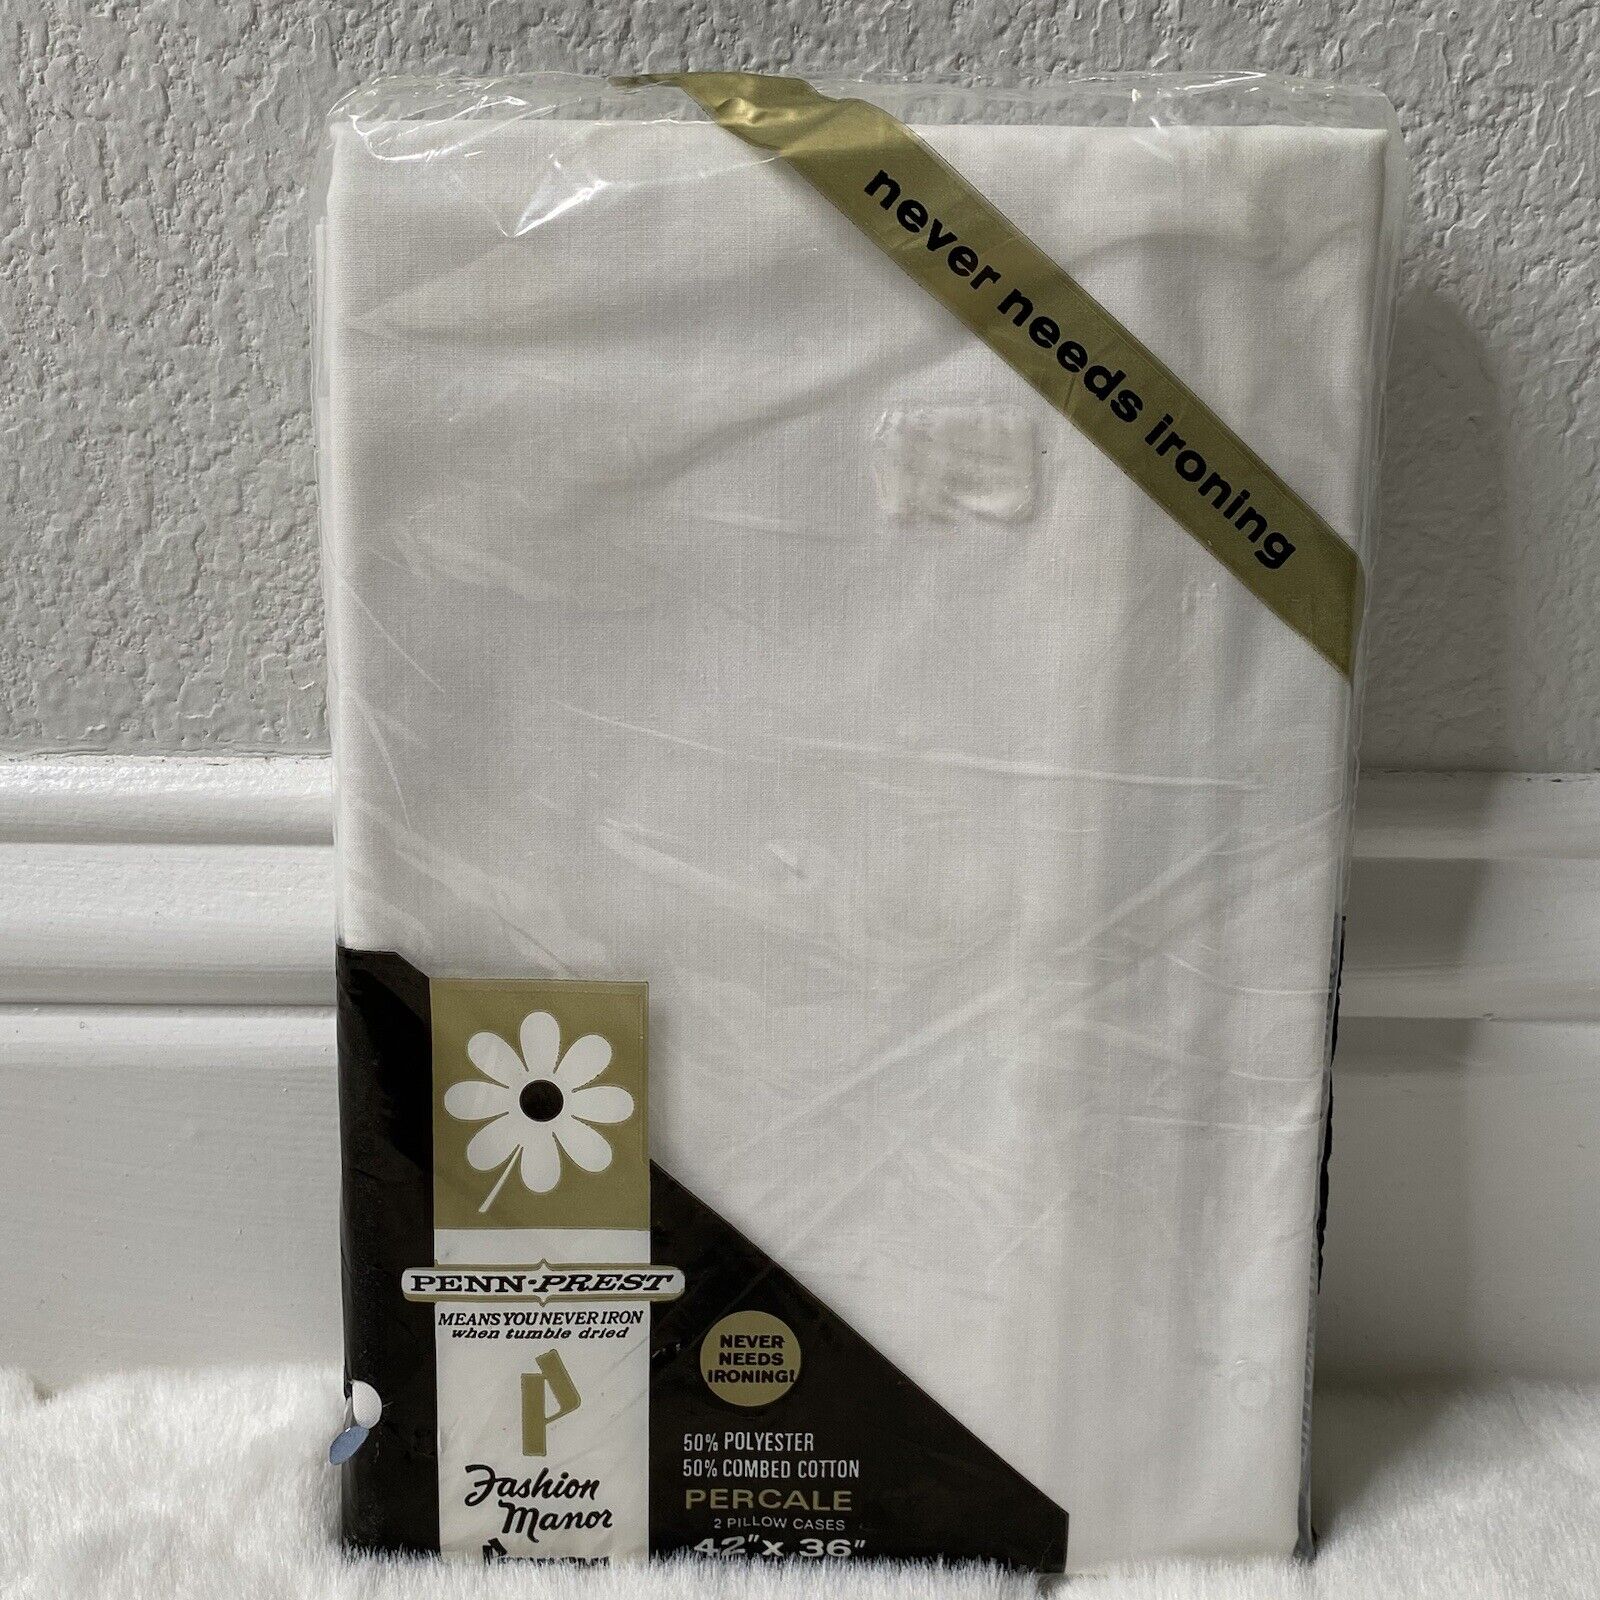 Vintage Penneys Fashion Manor Percale White Cotton Polyester Pillow Cases 42x36